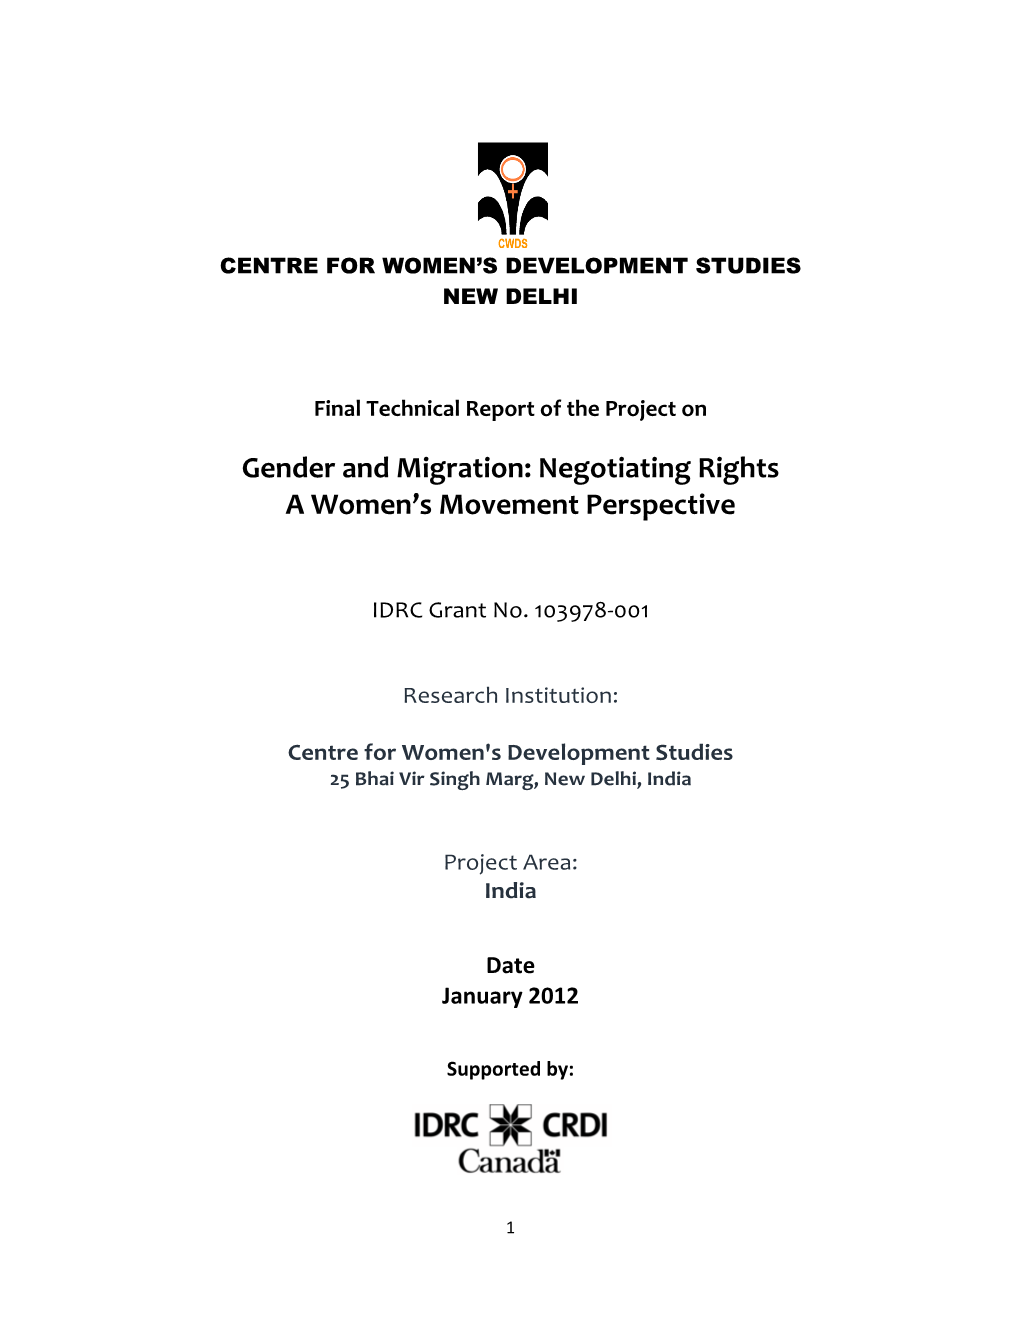 Gender and Migration: Negotiating Rights a Women's Movement